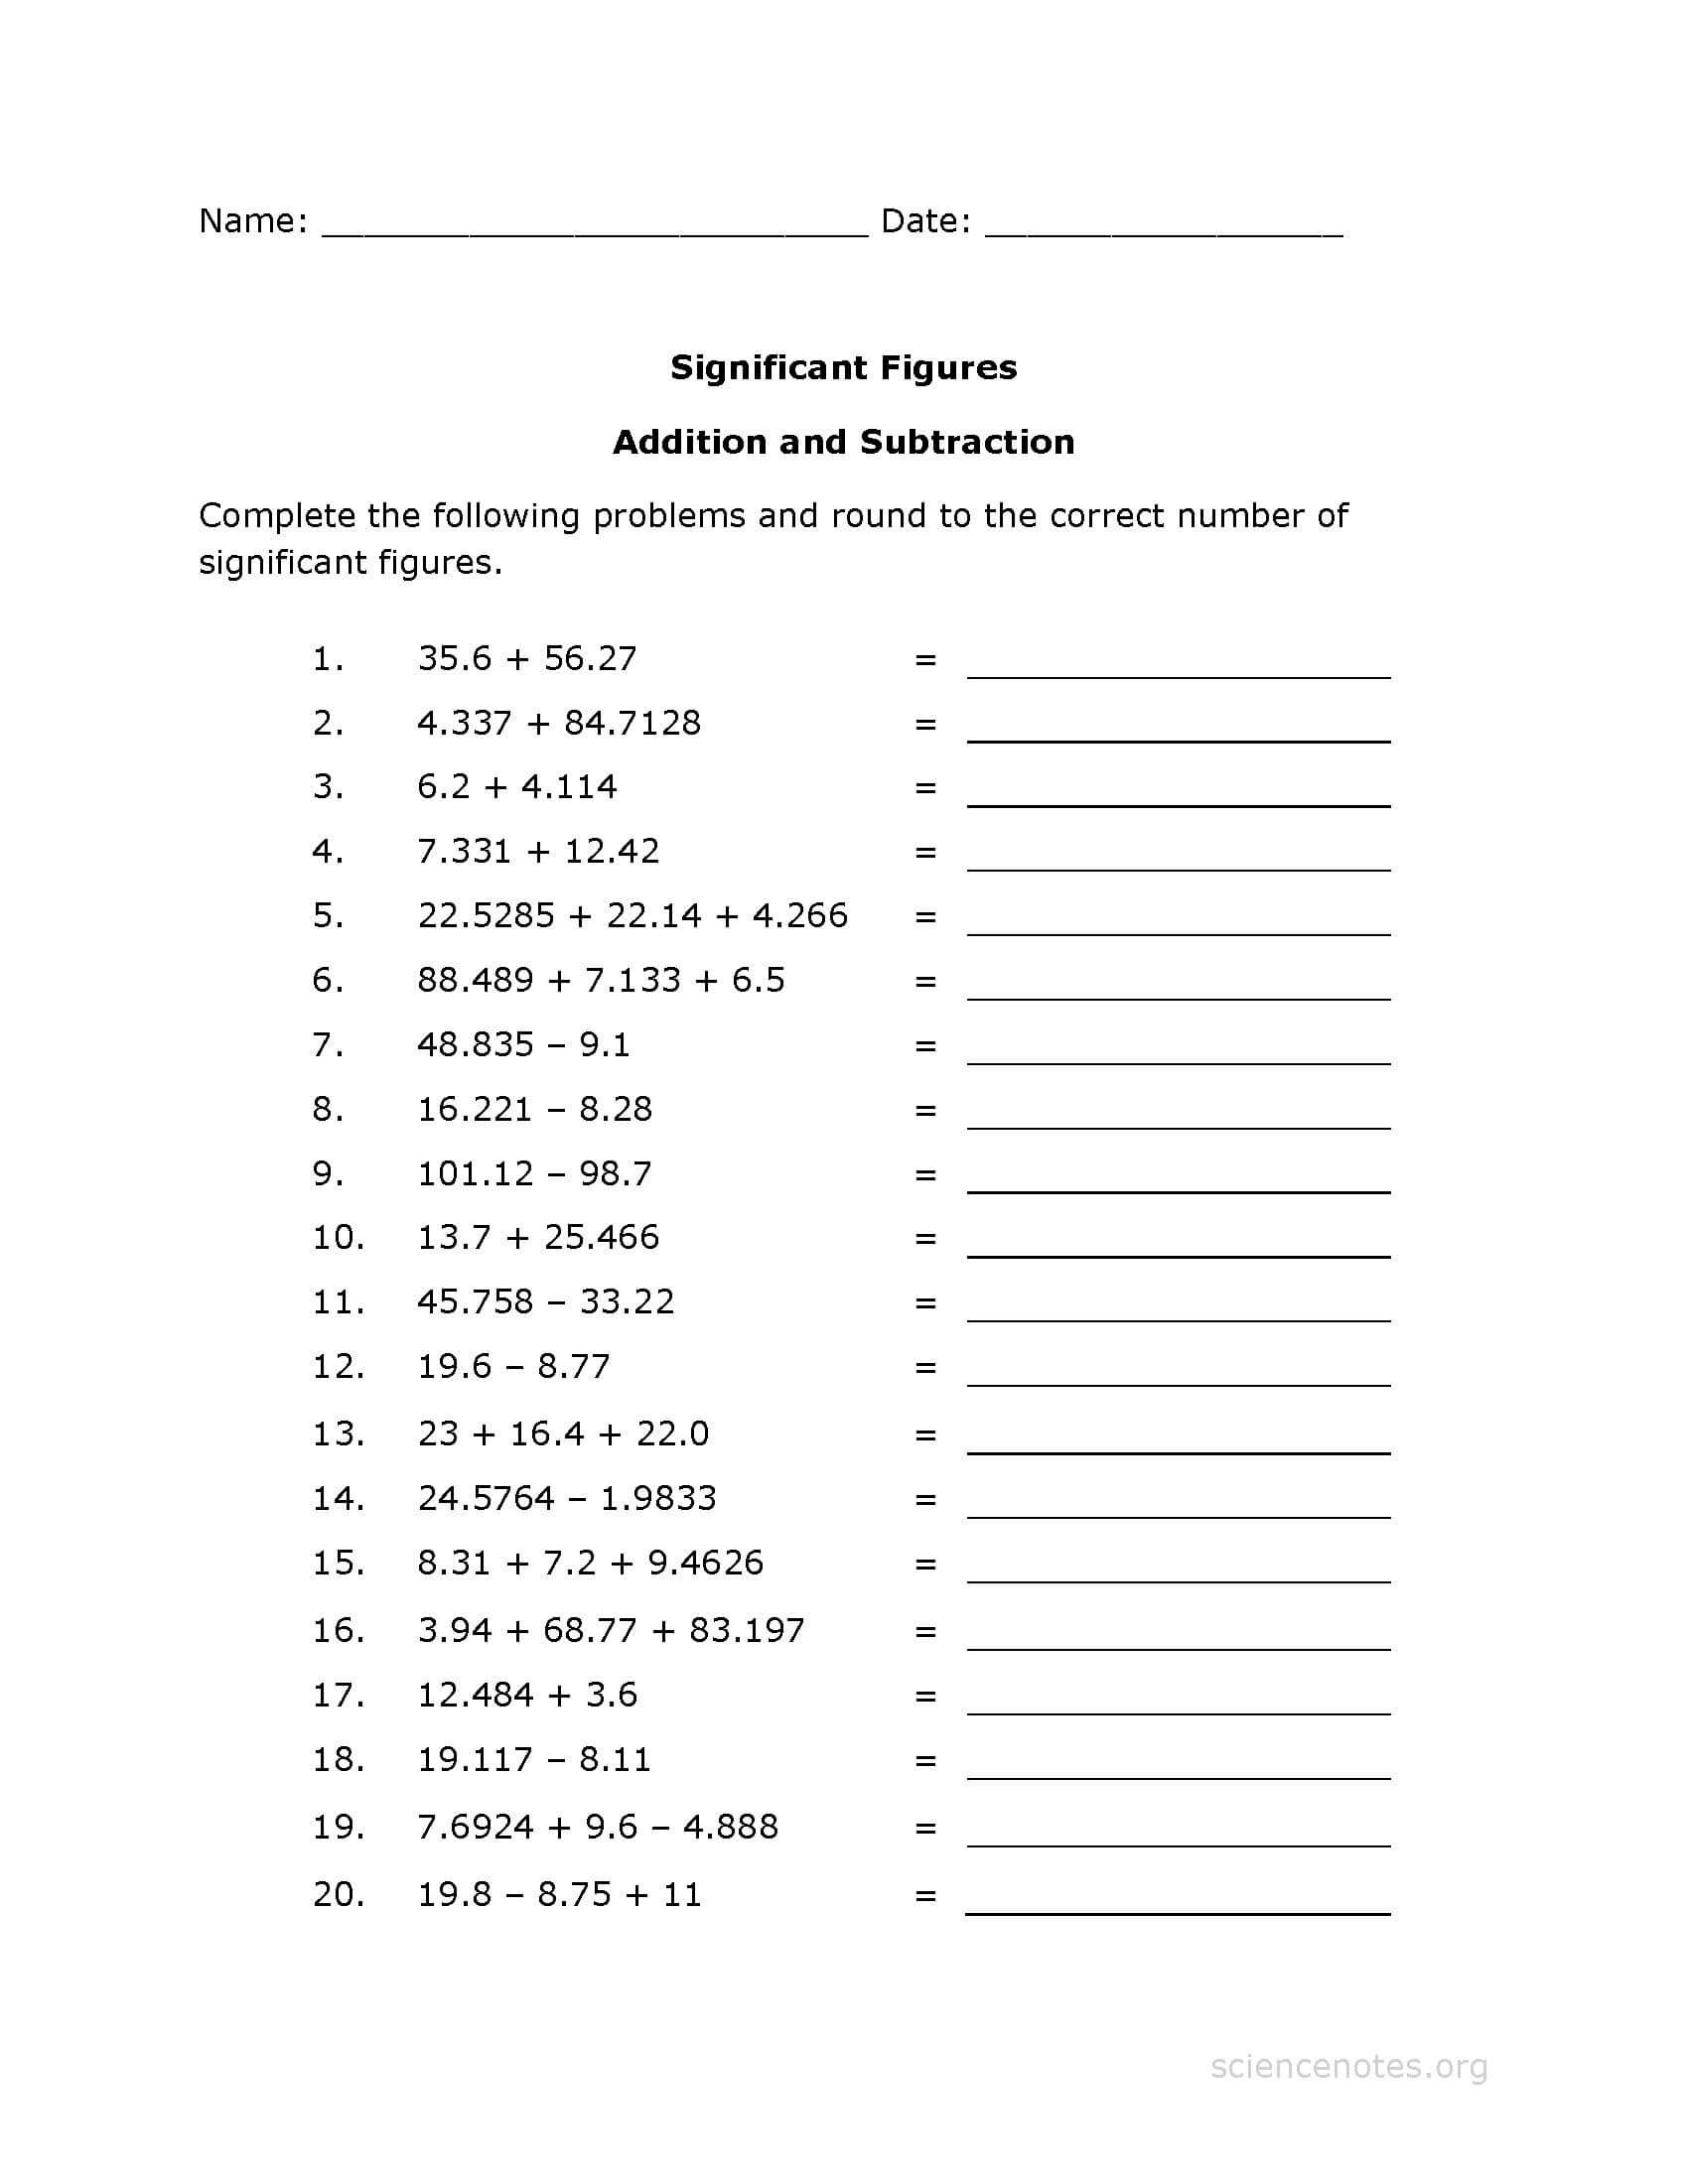 Significant Figures Worksheet Pdf  Addition Practice Pertaining To Significant Figures Practice Worksheet Answer Key